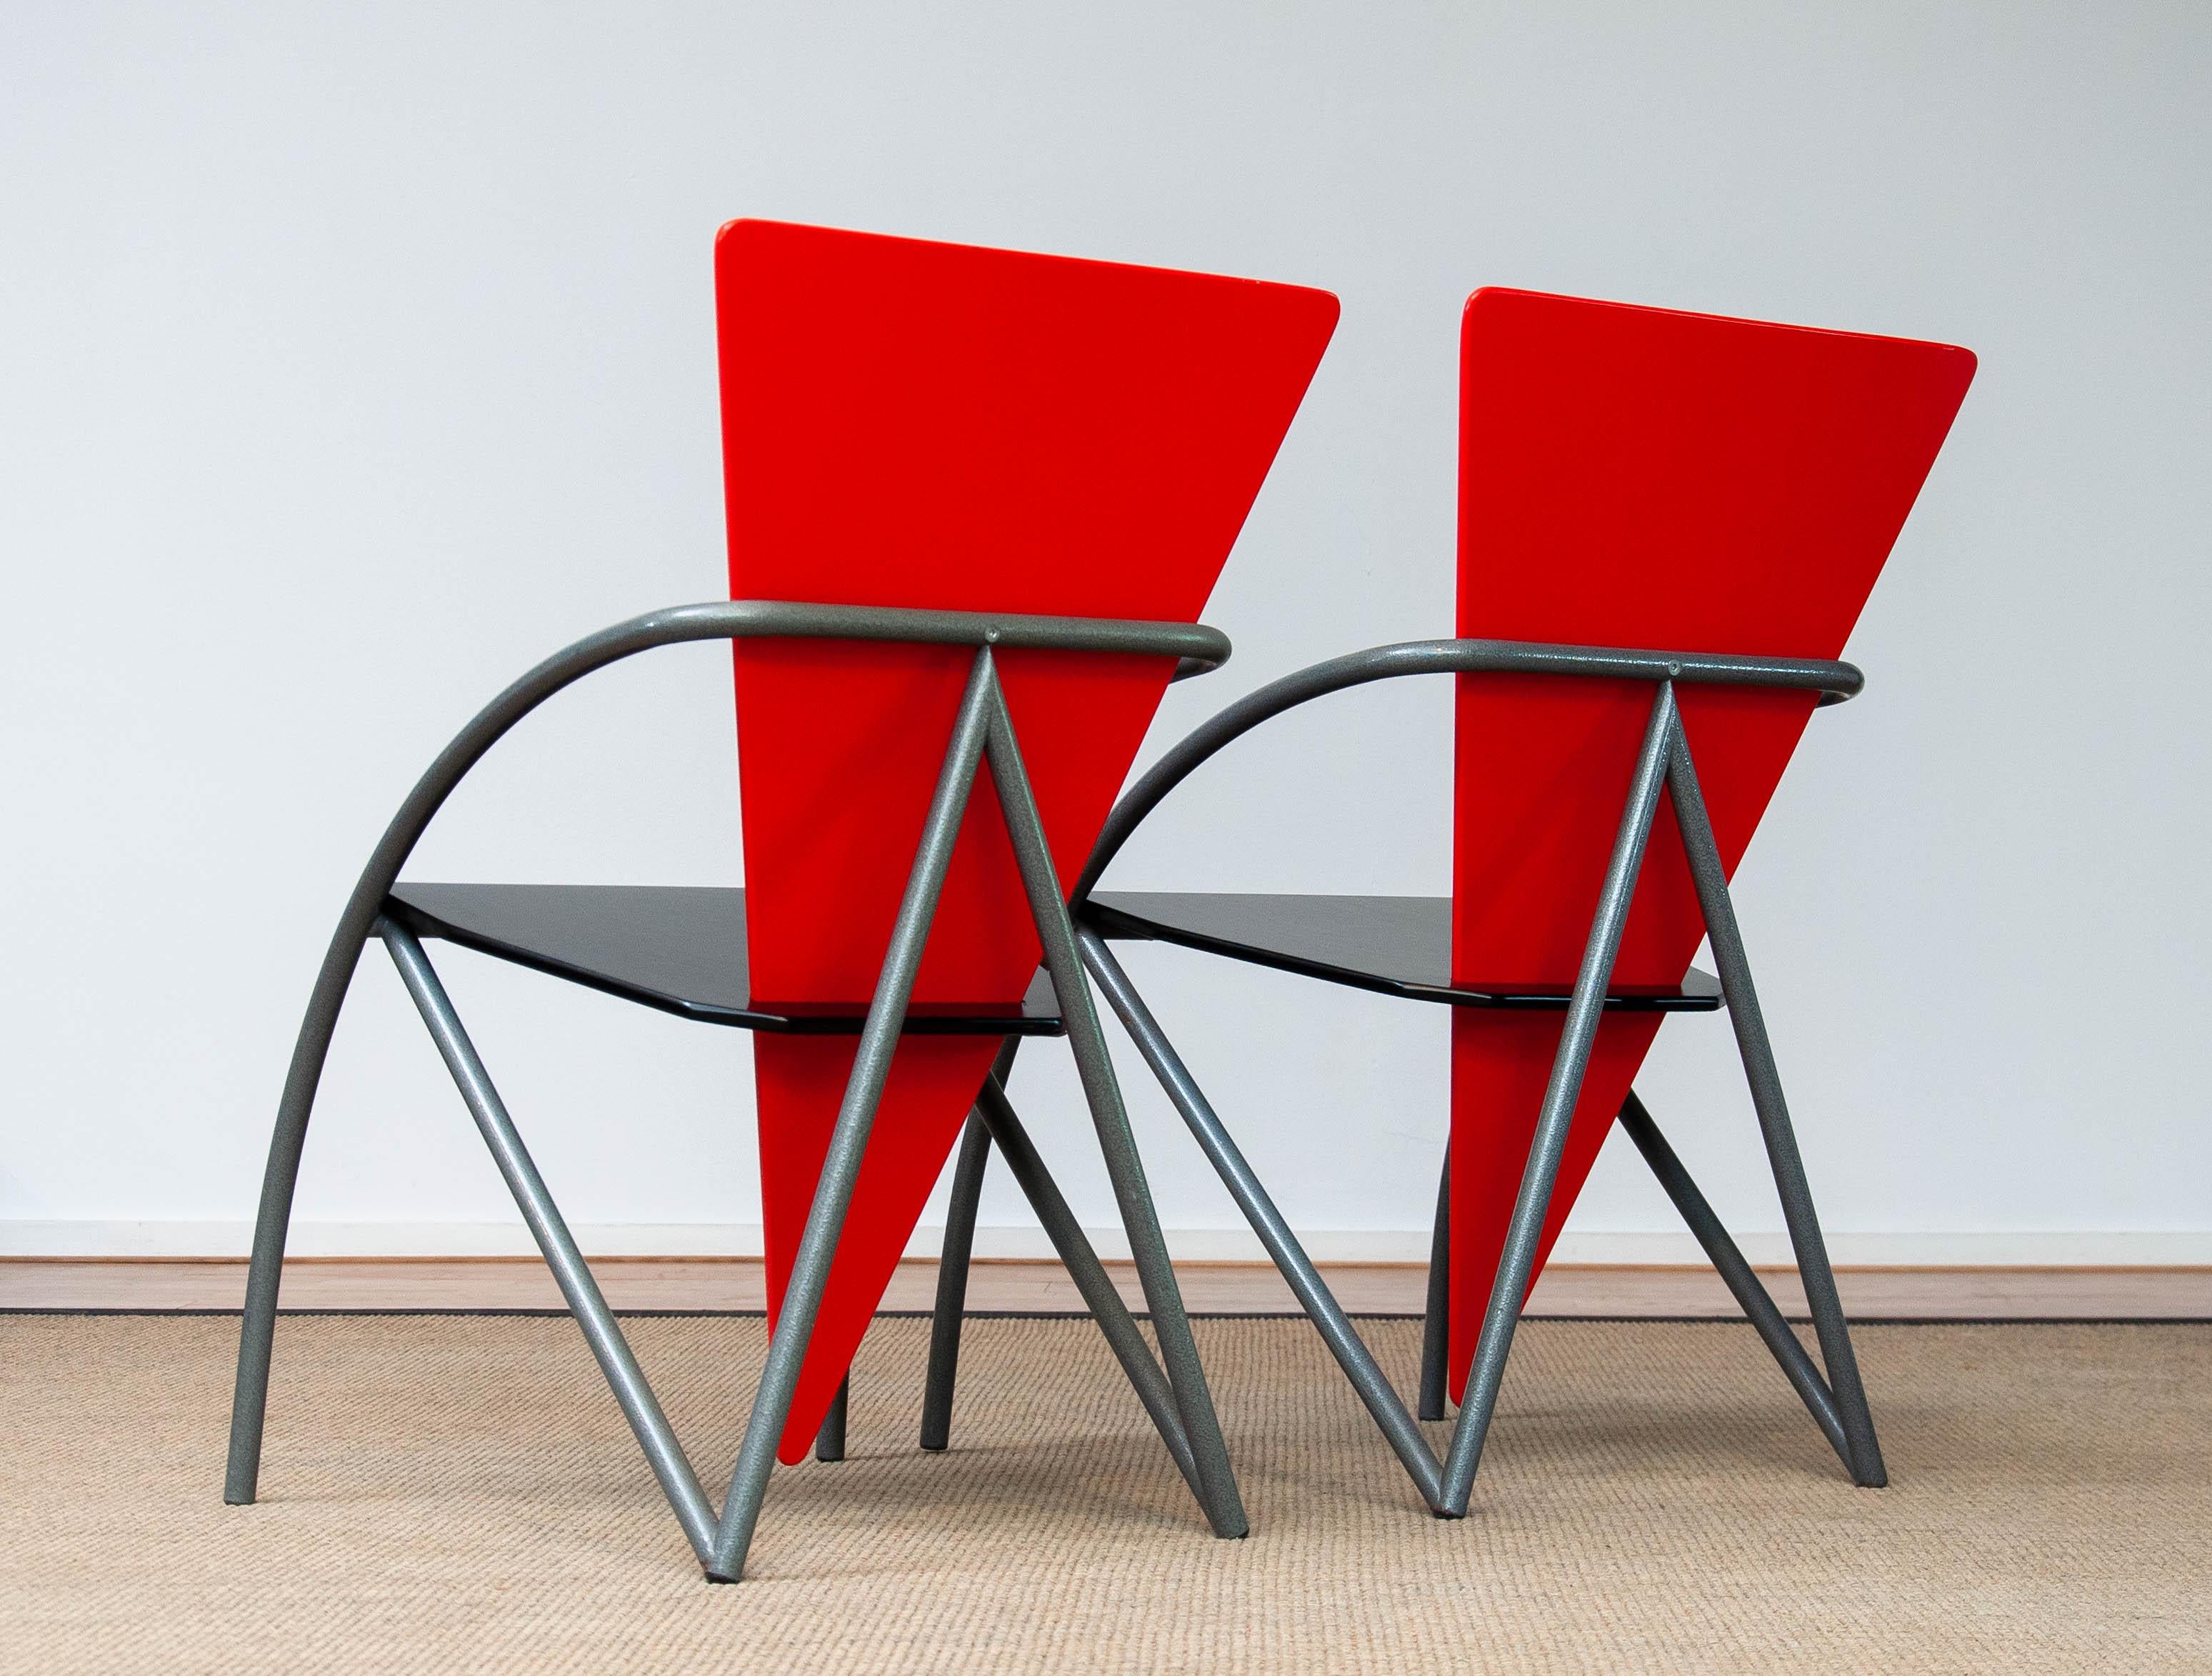 80's Pair Post-Modern Dining Office Chairs in Red and Black by Klaus Wettergren In Good Condition For Sale In Silvolde, Gelderland